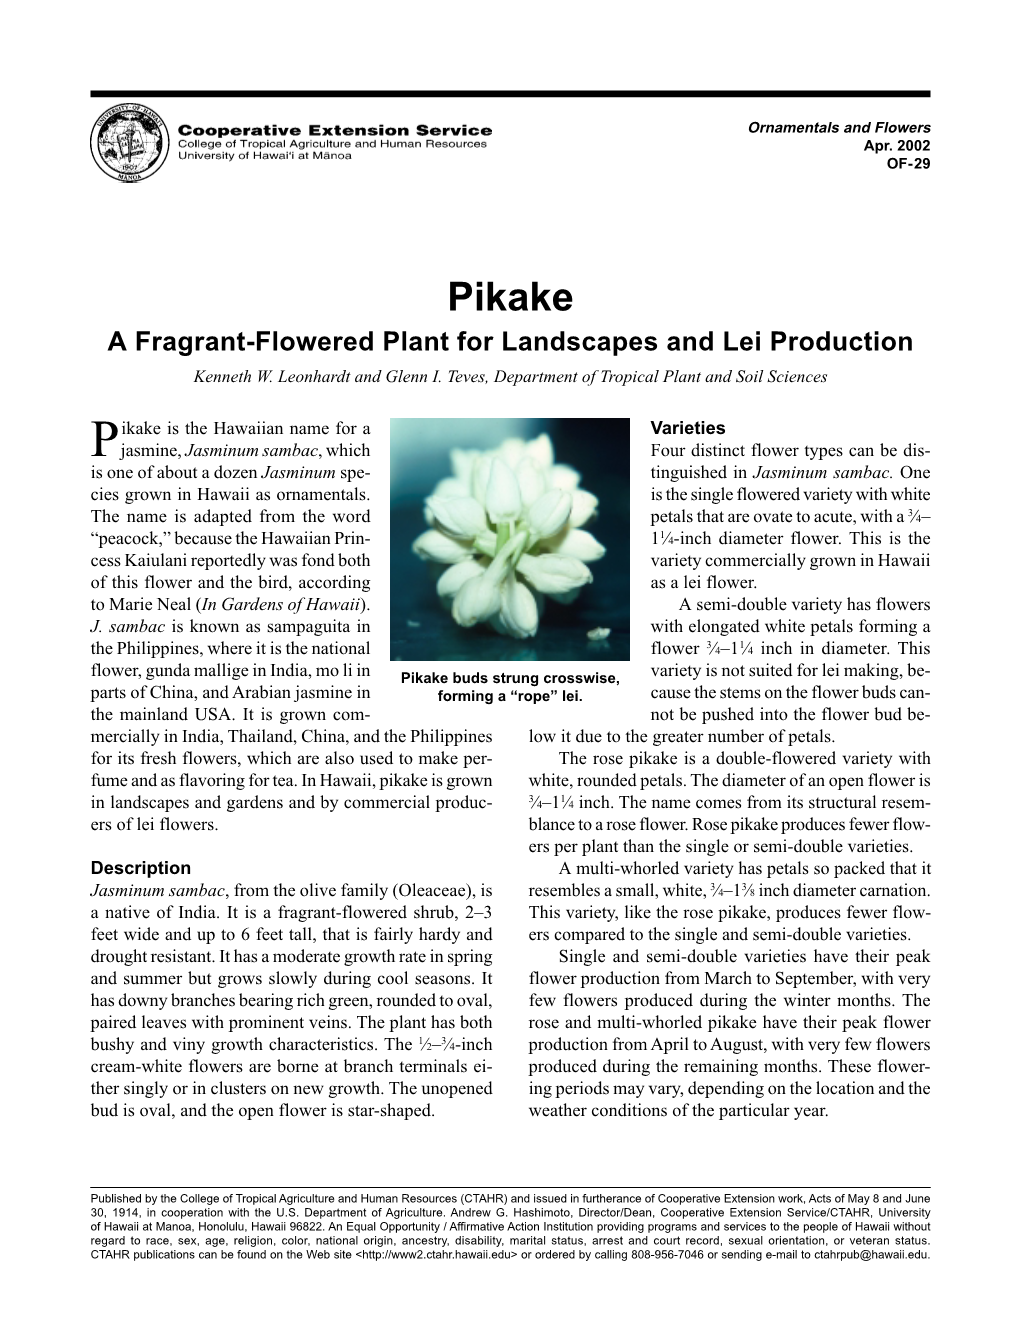 Pikake, a Fragrant-Flowered Plant for Landscapes and Lei Production